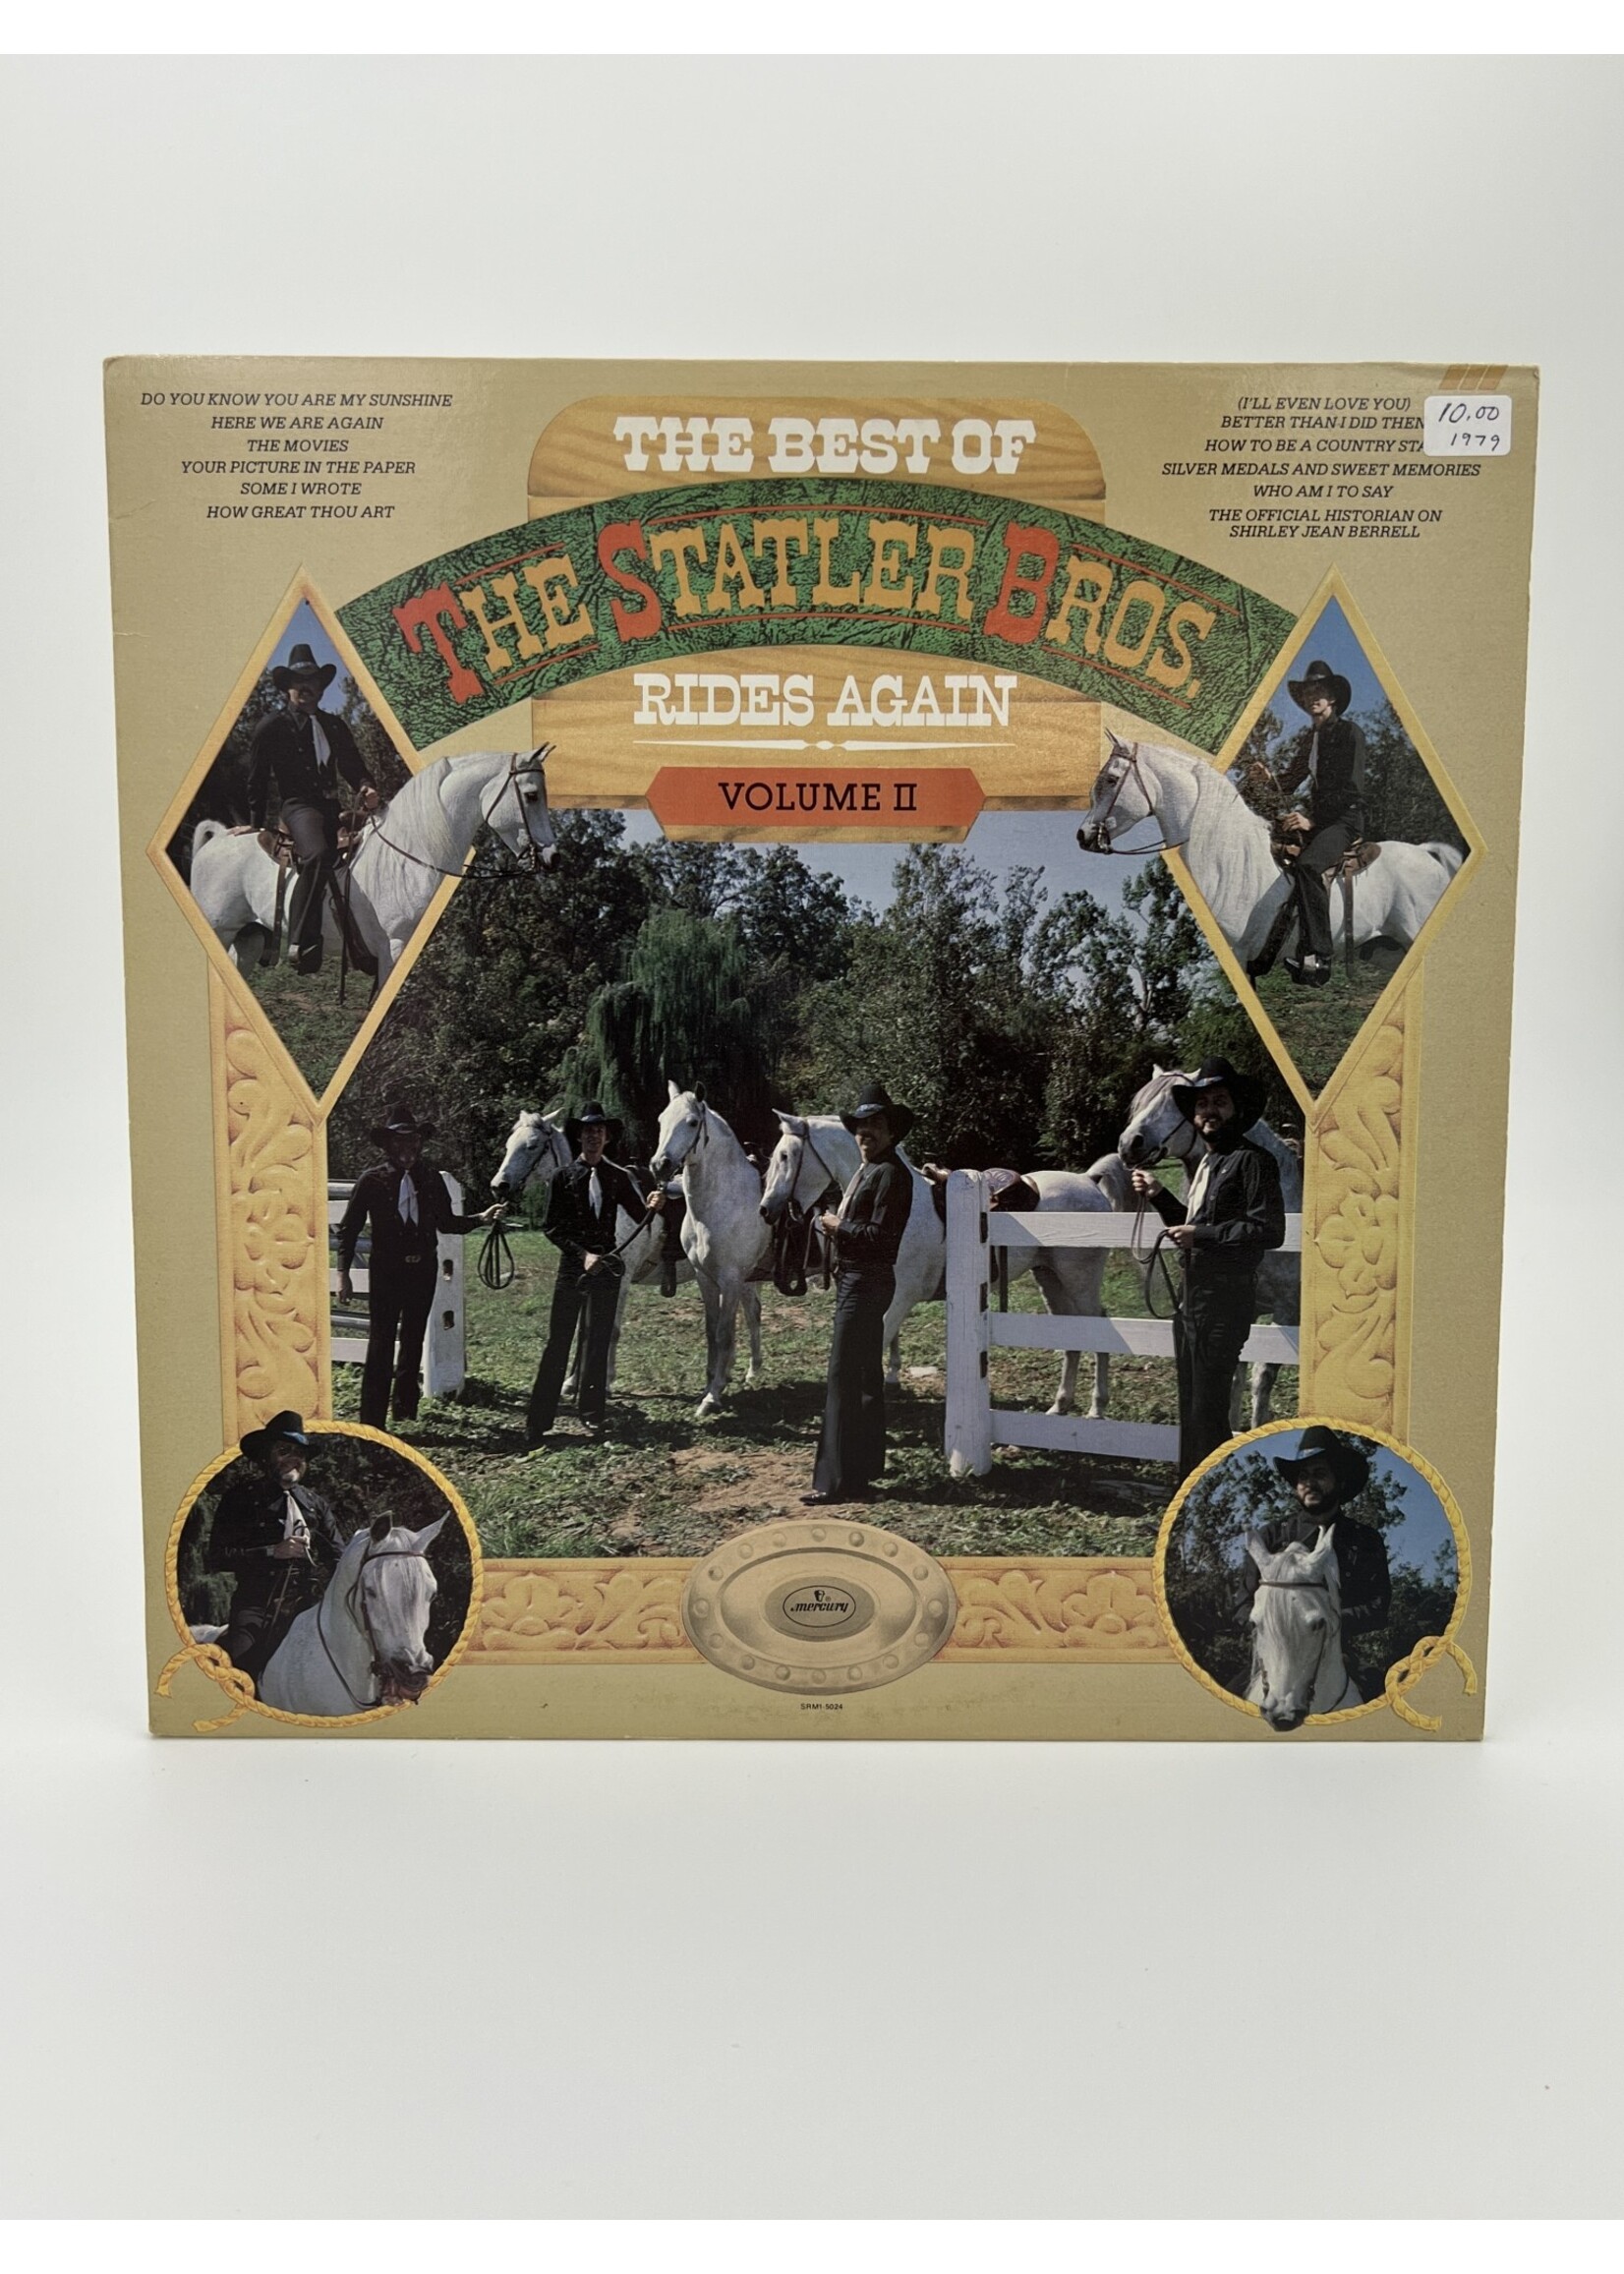 LP   The Best Of The Statler Bros Rides Again Volume 2 LP Record